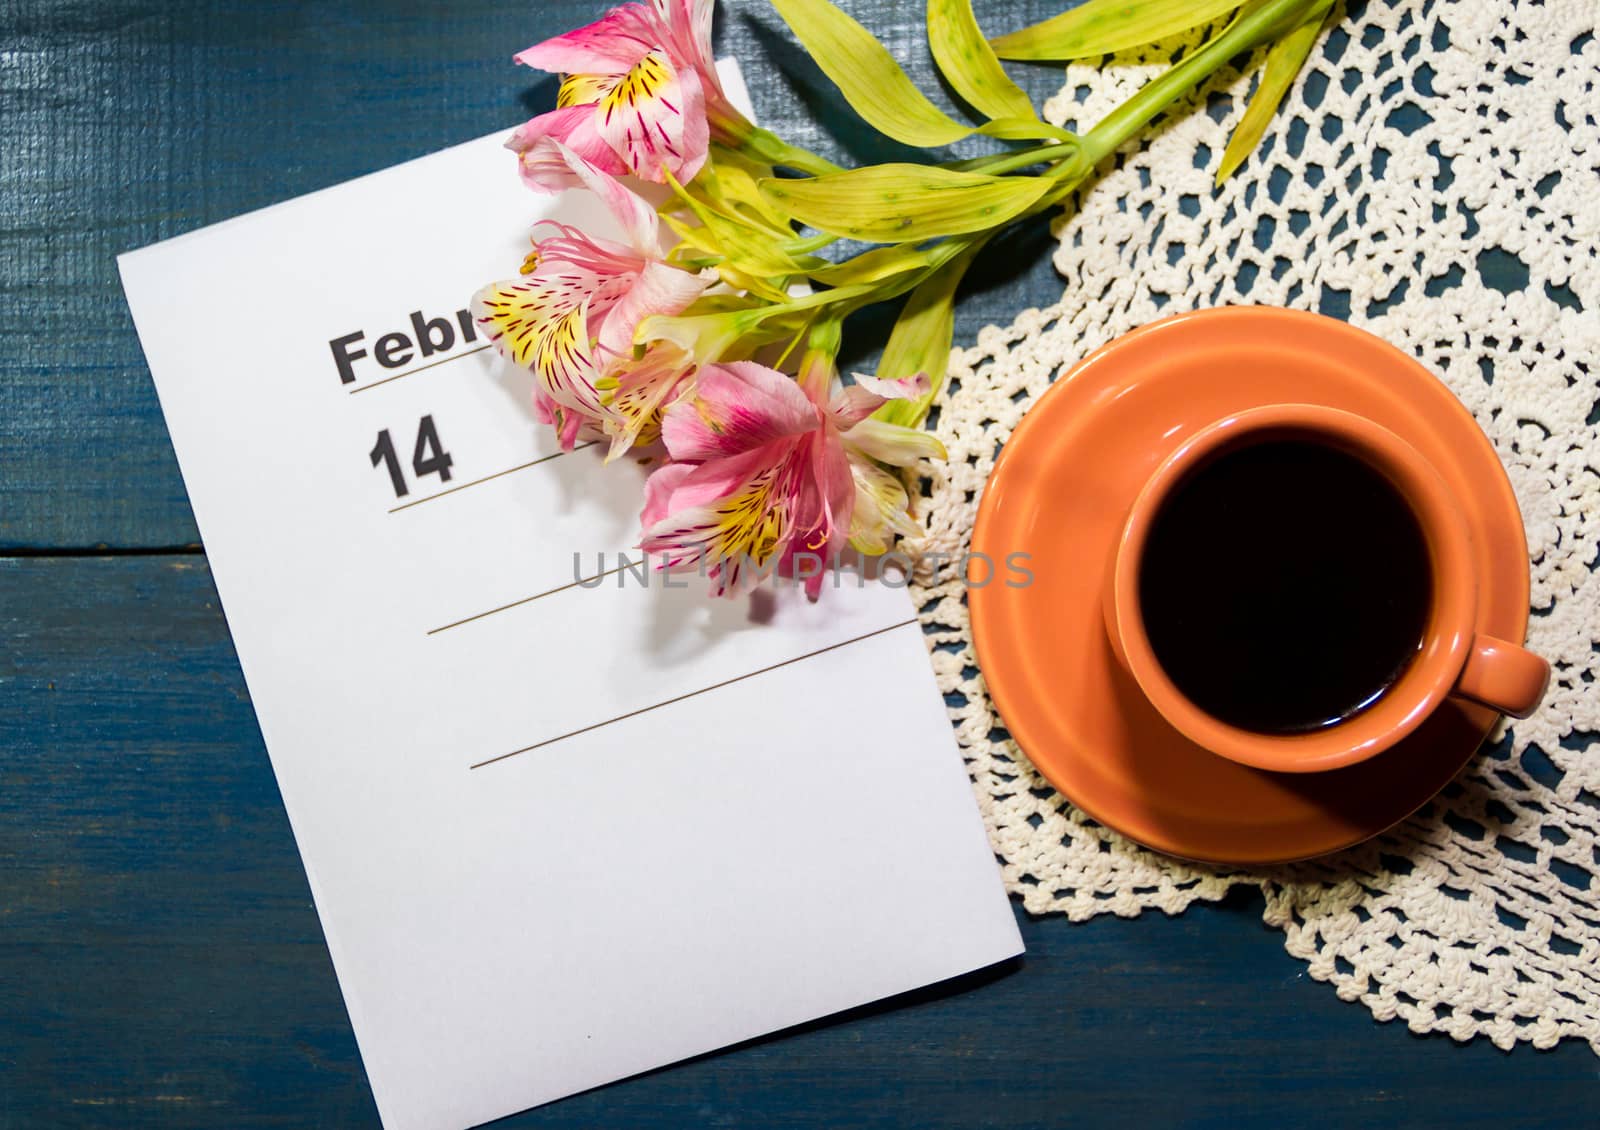 cup of coffee with flowers and note with place for text